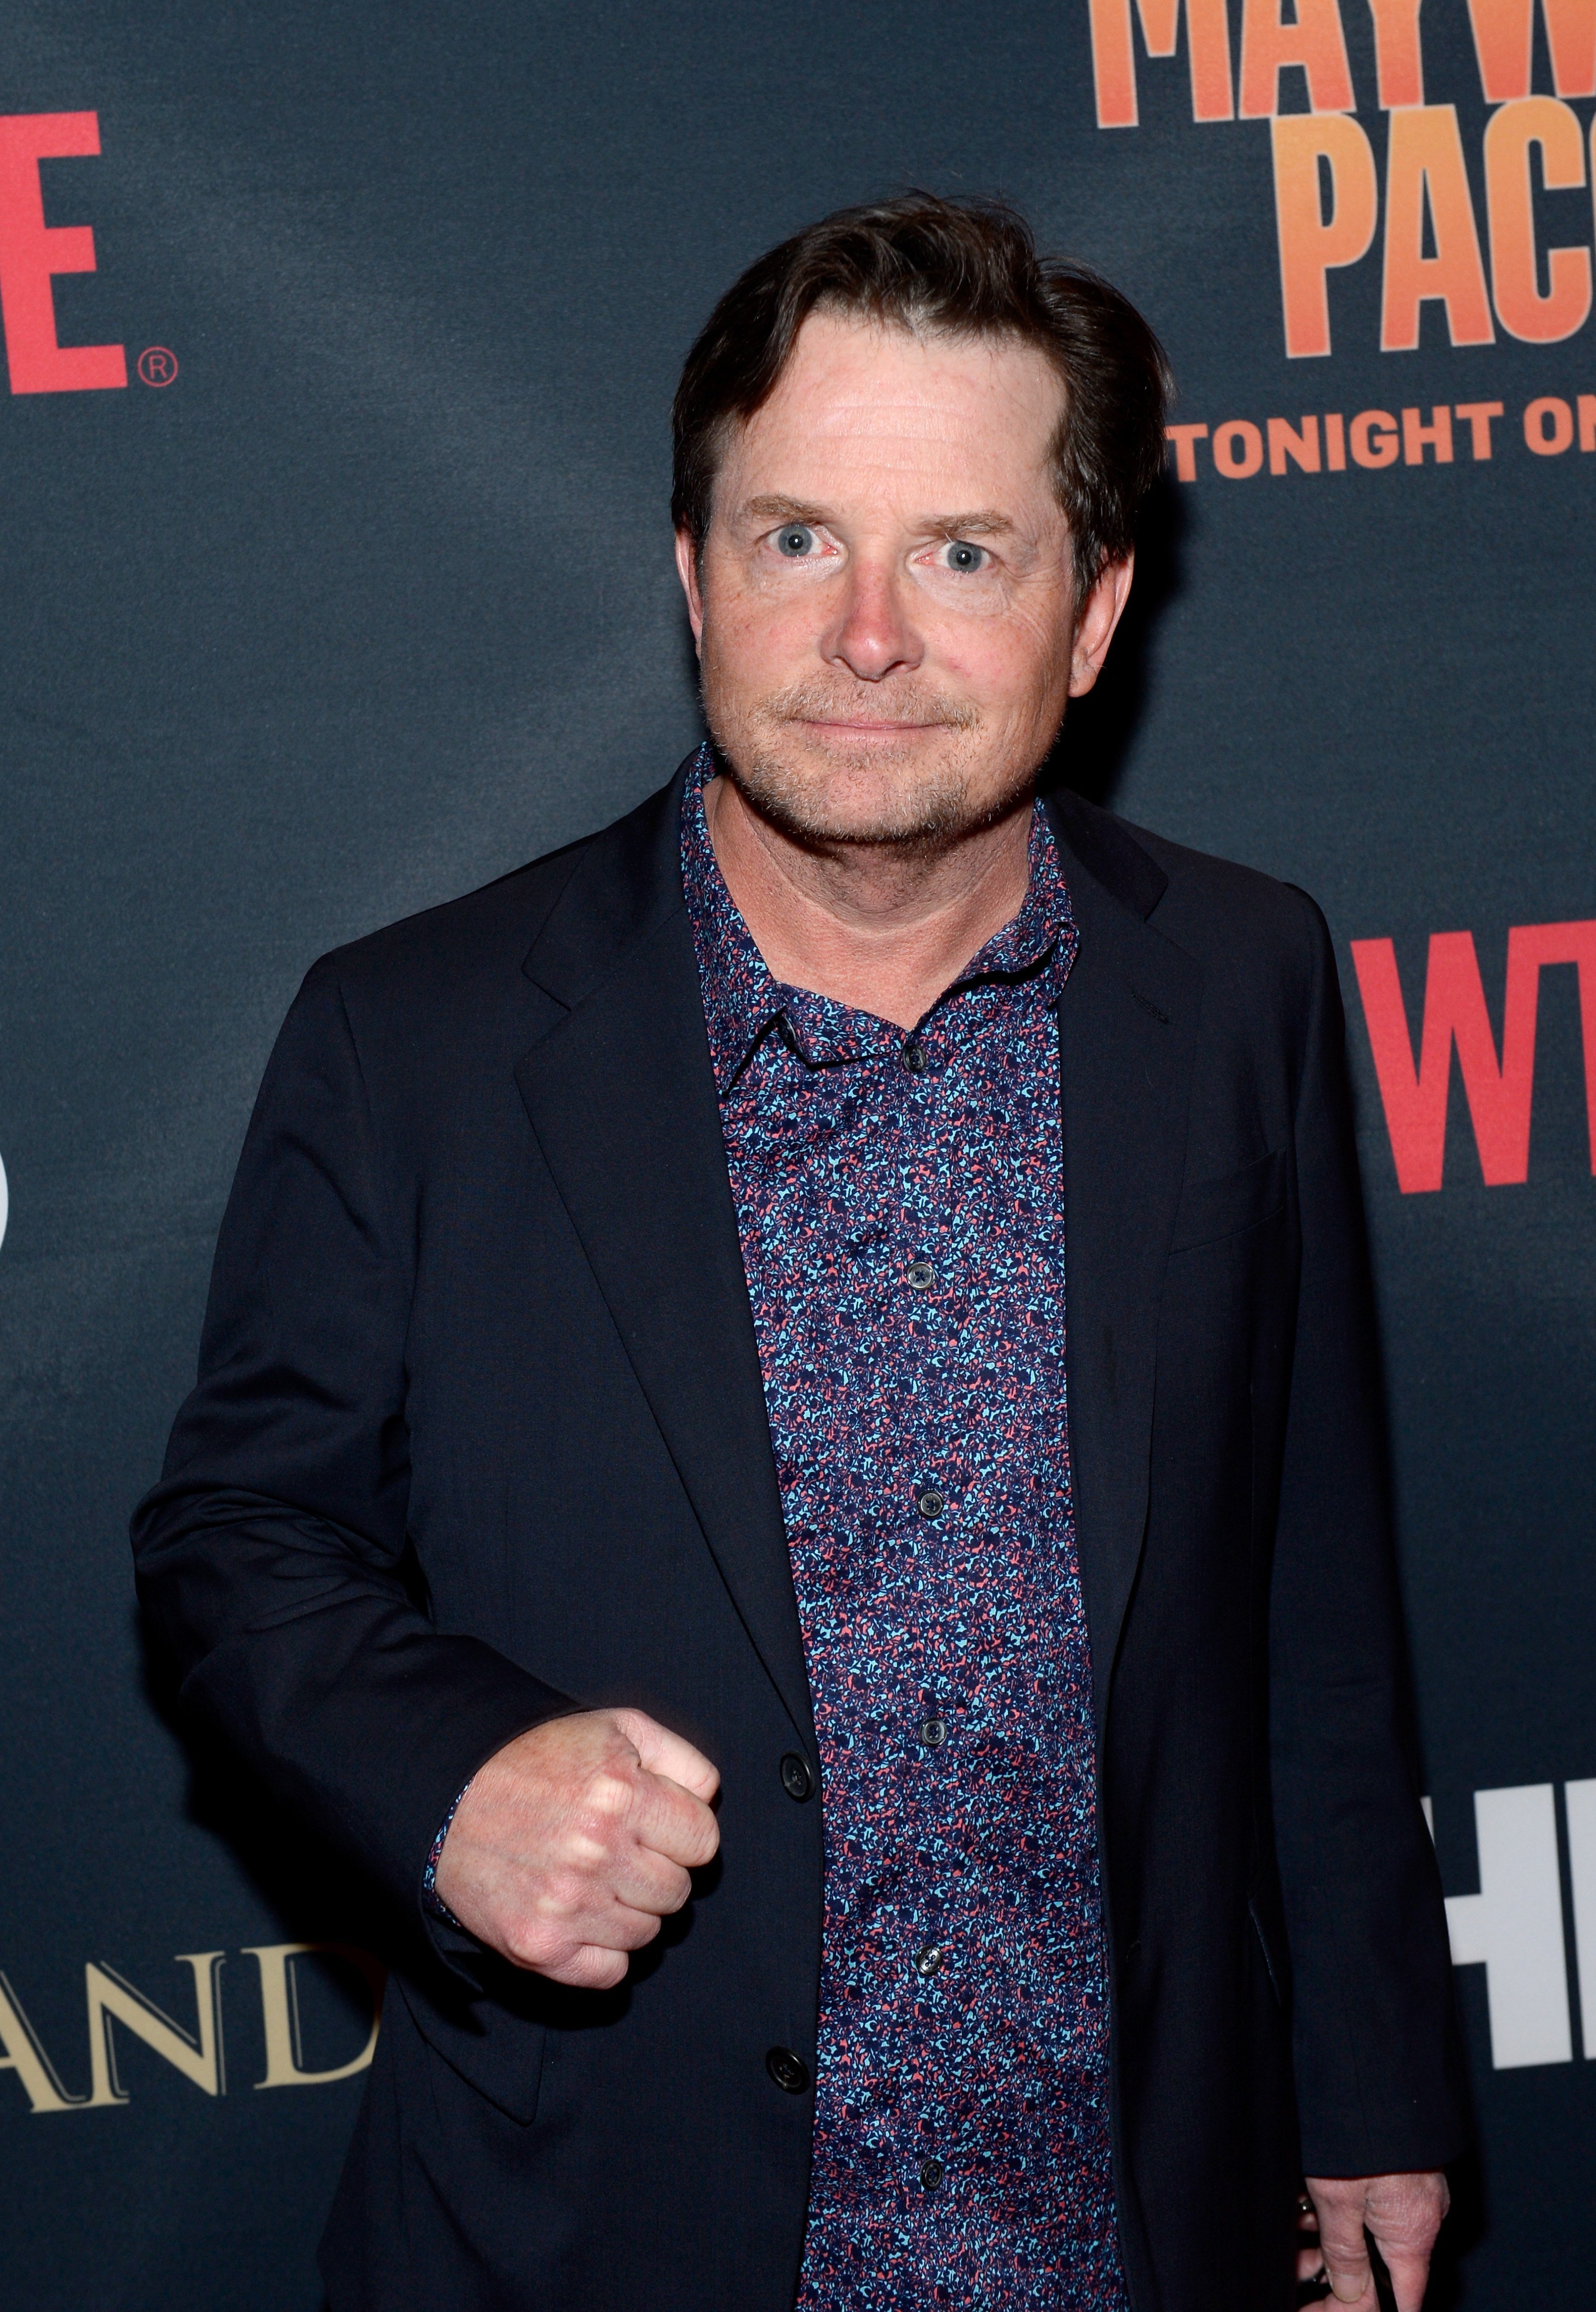 Michael J. Fox at the SHOWTIME And HBO VIP Pre-Fight Party for "Mayweather VS Pacquiao" at MGM Grand Hotel & Casino on May 2, 2015. | Photo: GettyImages